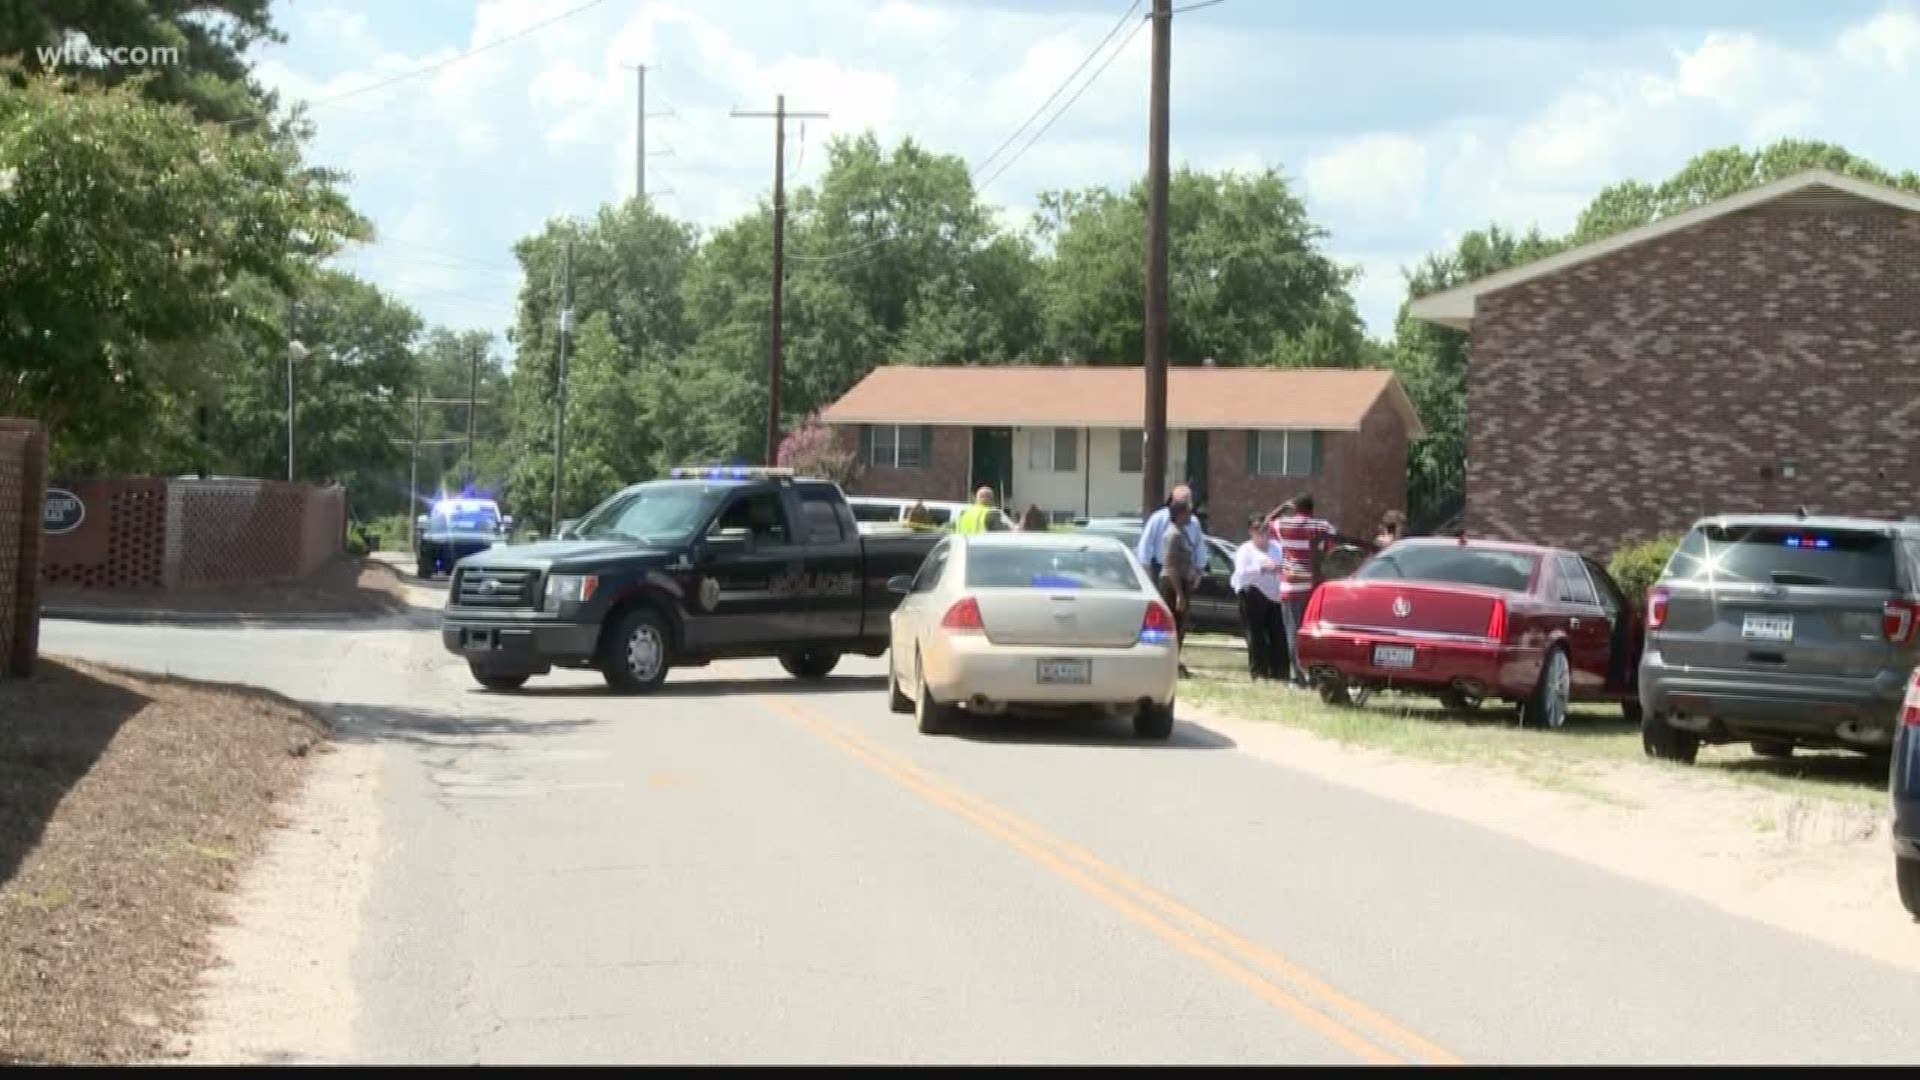 One person is dead and two people have been wounded after a shooting at an apartment complex in West Columbia Thursday afternoon.